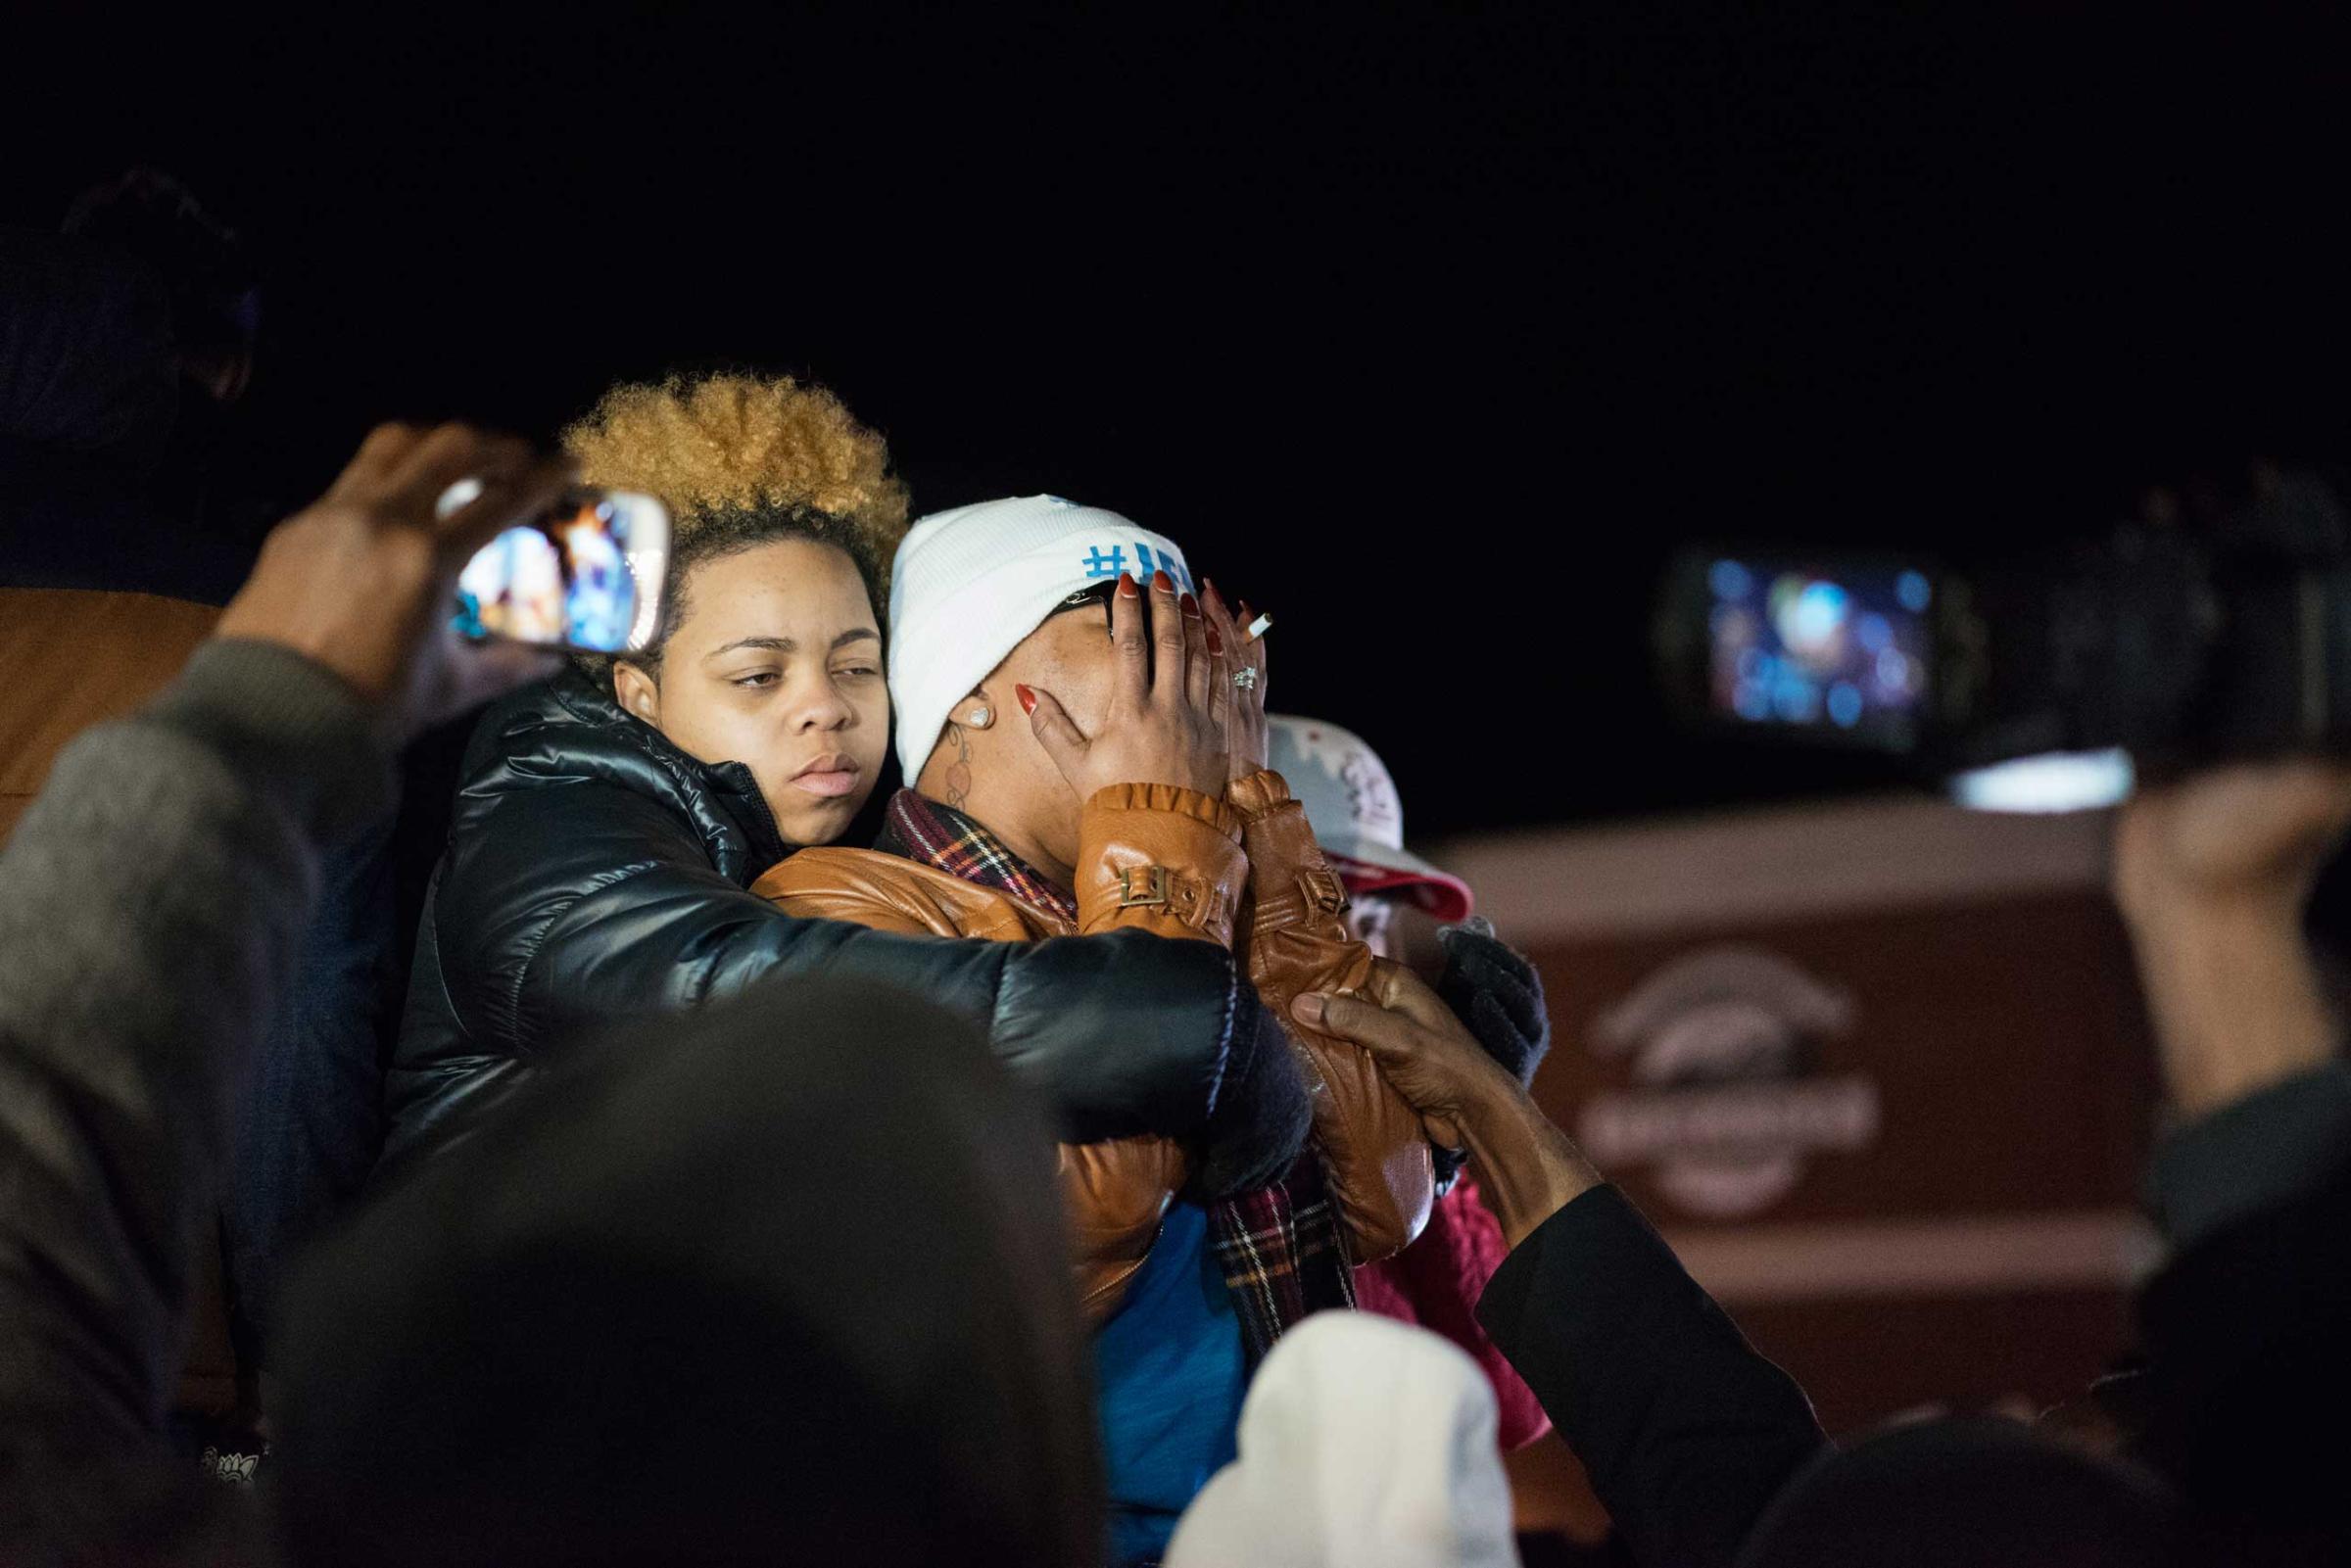 Lesley McSpadden Michael Brown's mother and other protestors demonstrate amidst tear gas and smoke in Ferguson, Mo. on Nov. 24, 2014